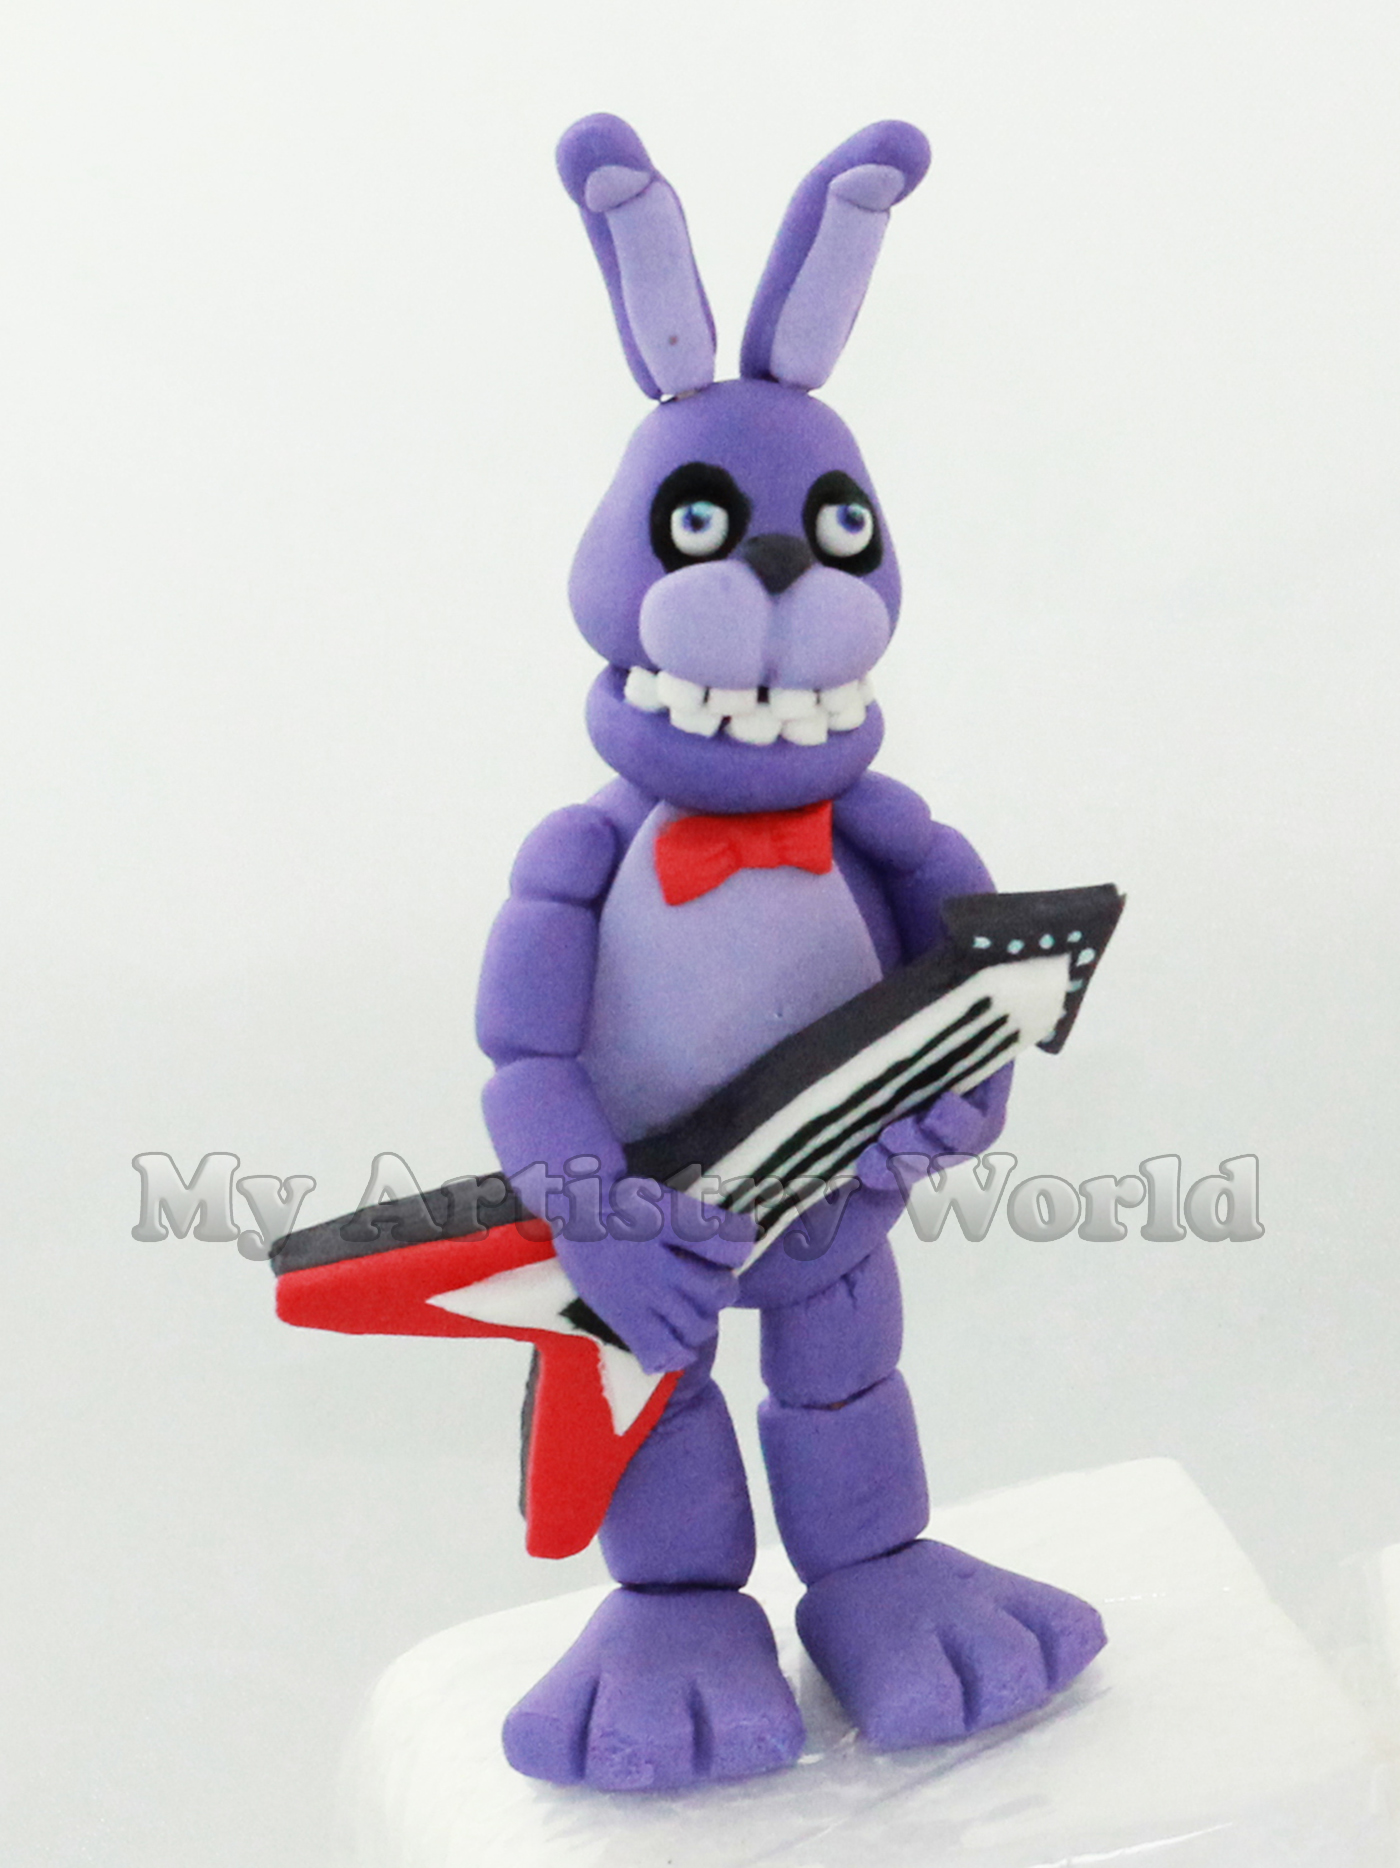 Five Nights at Freddy's cake topper - My Artistry World